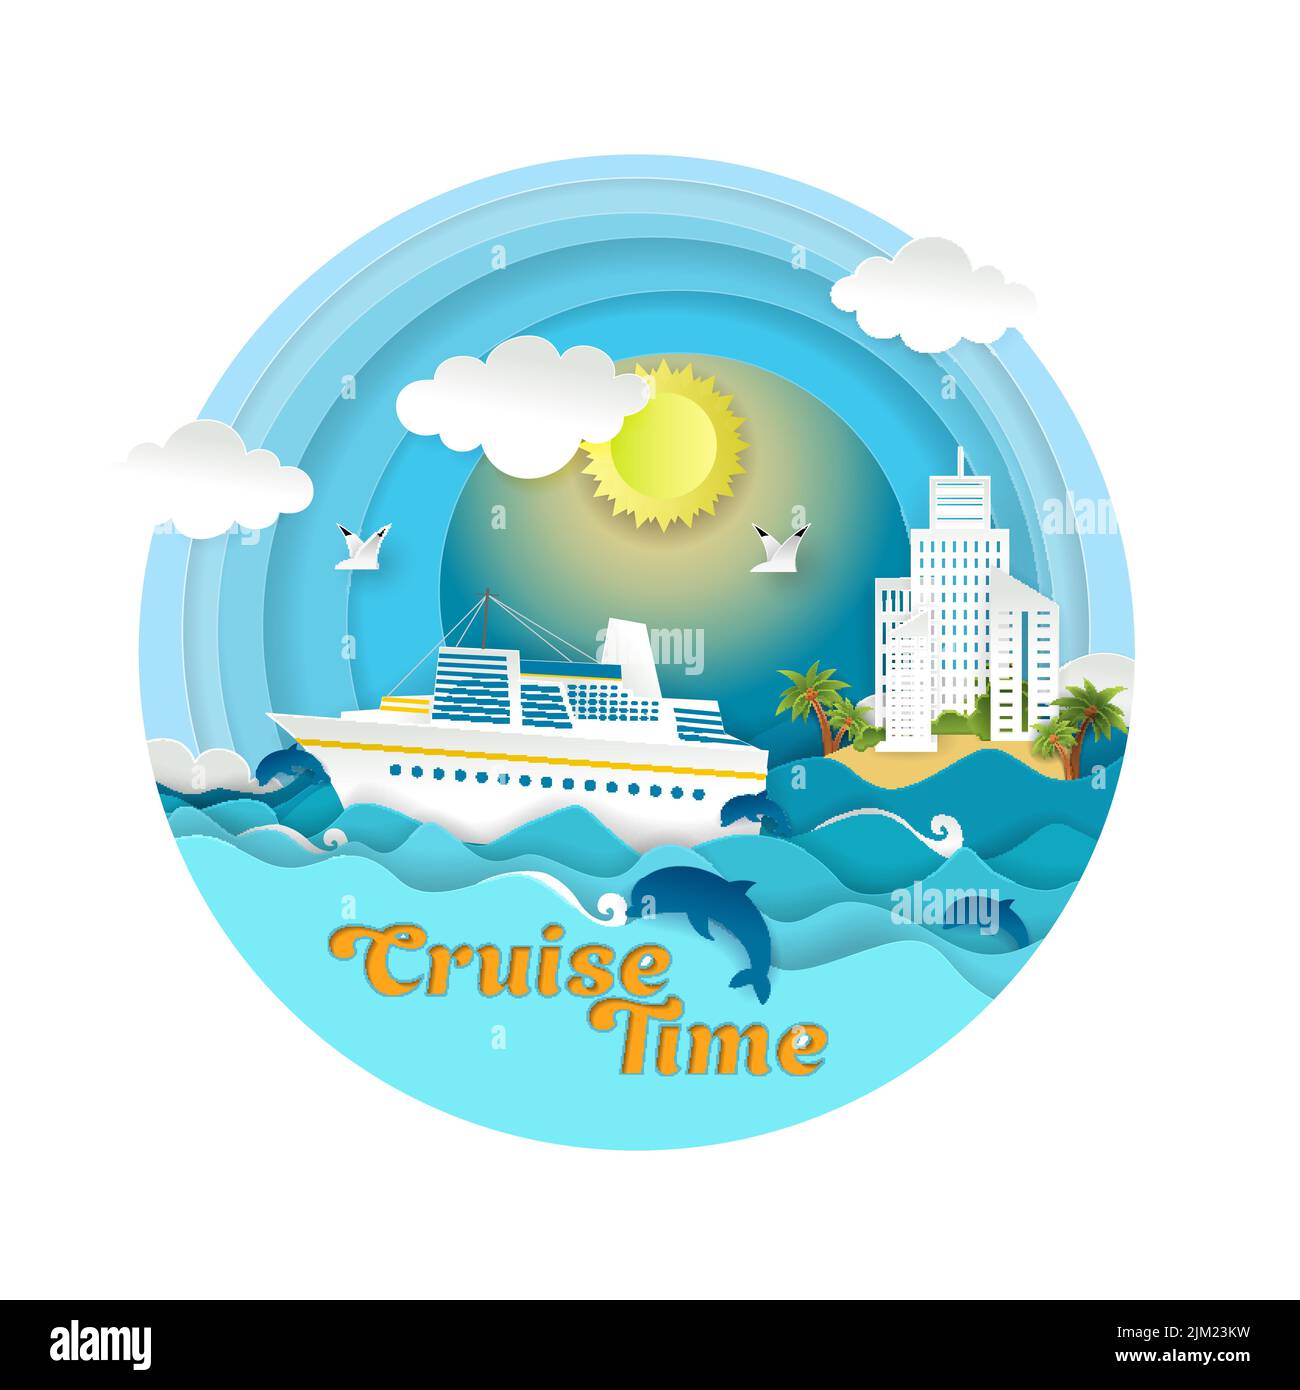 Cruise time vector paper cut illustration. Cruise liner floating on ocean waves, dolphins, seagulls, islands, tourist resorts. Sea voyage, summer crui Stock Vector